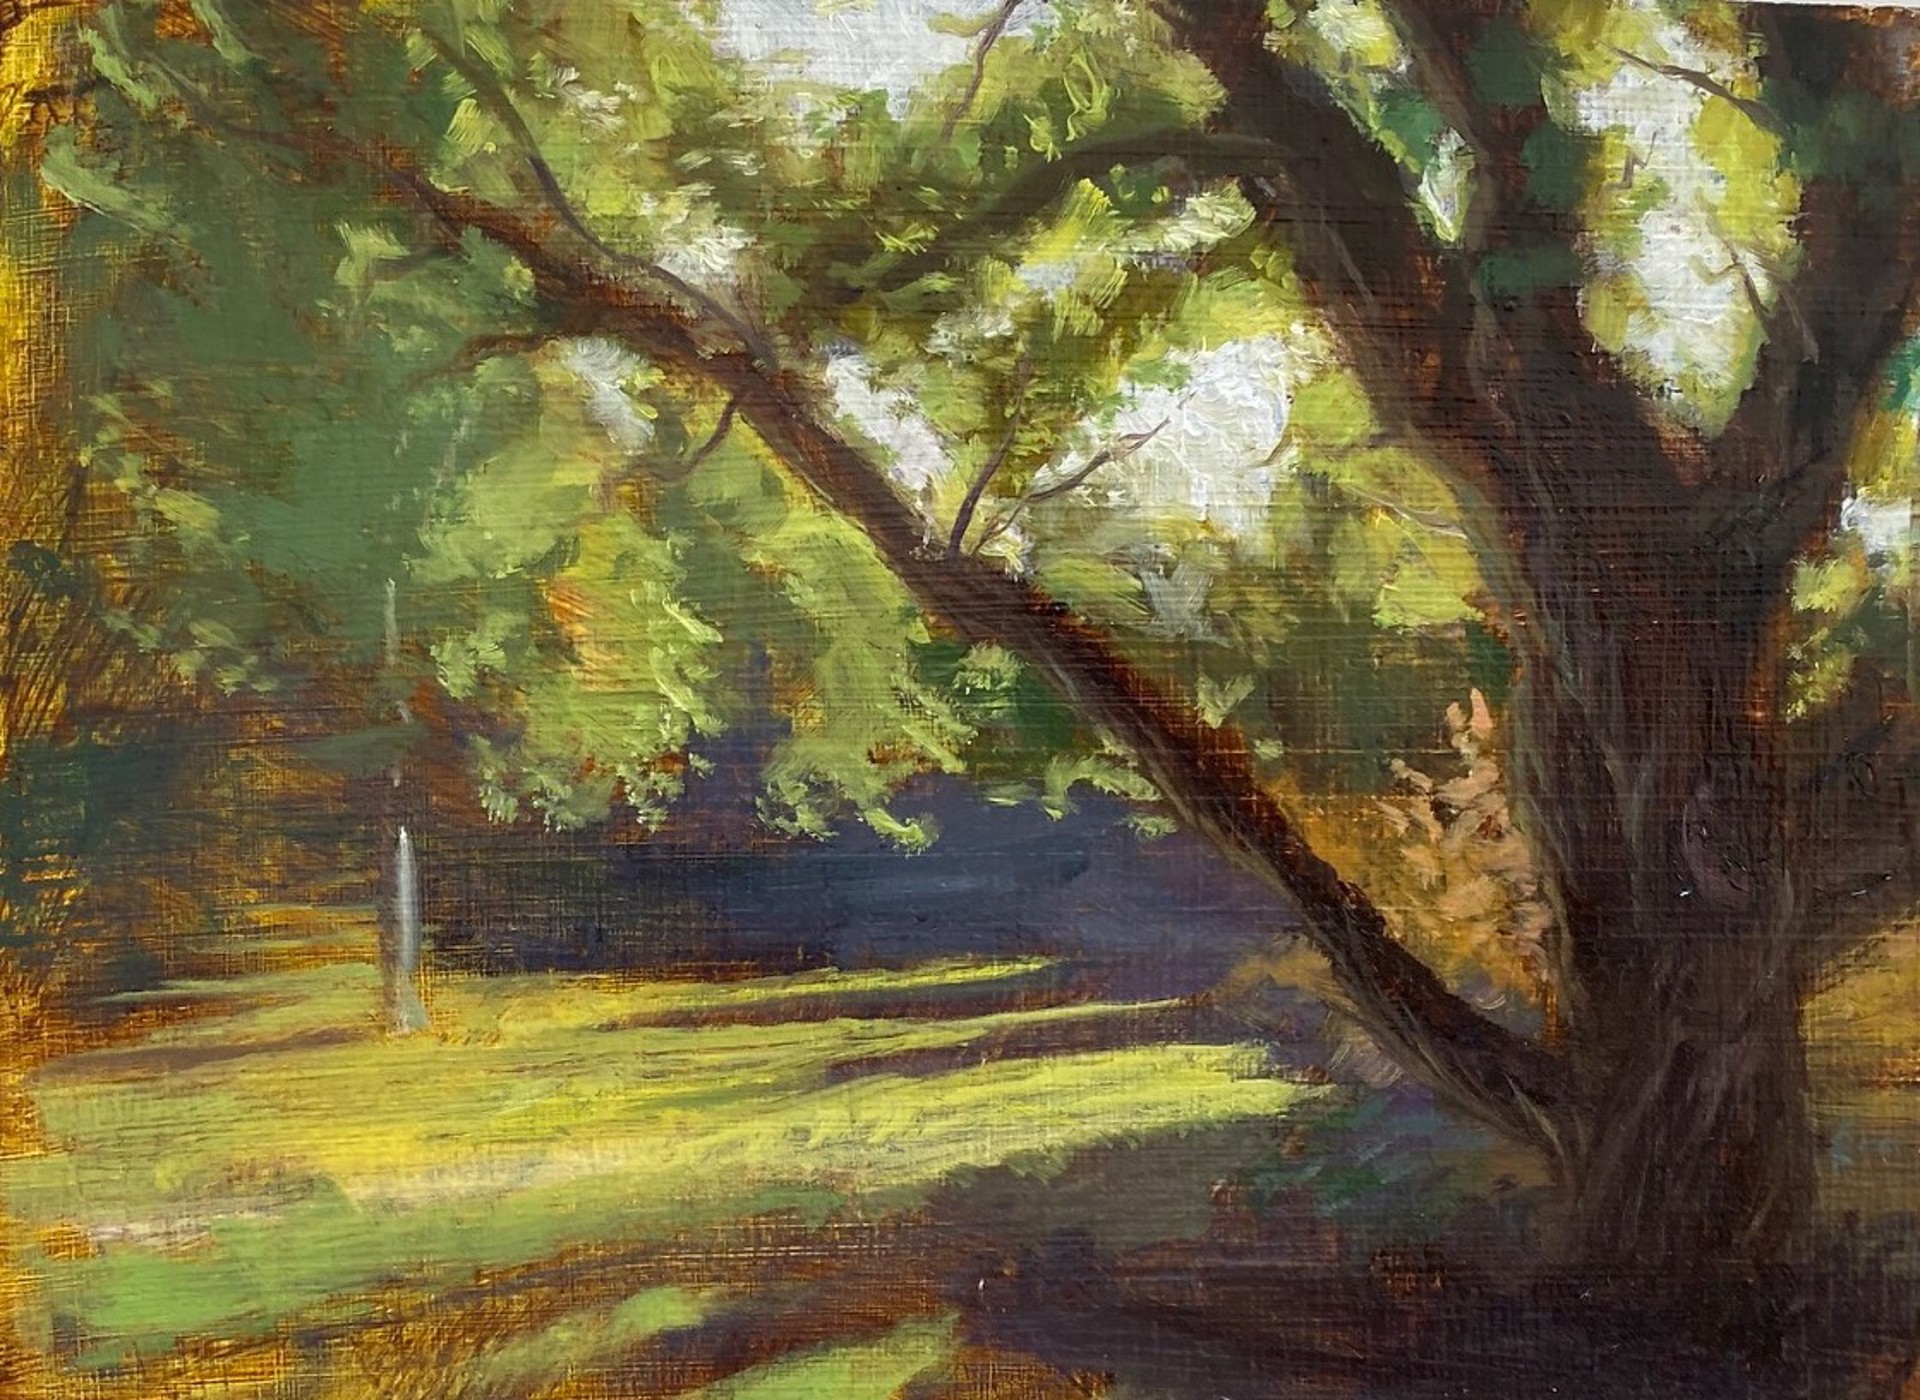 Morning Light Through the Trees by Christopher Clark